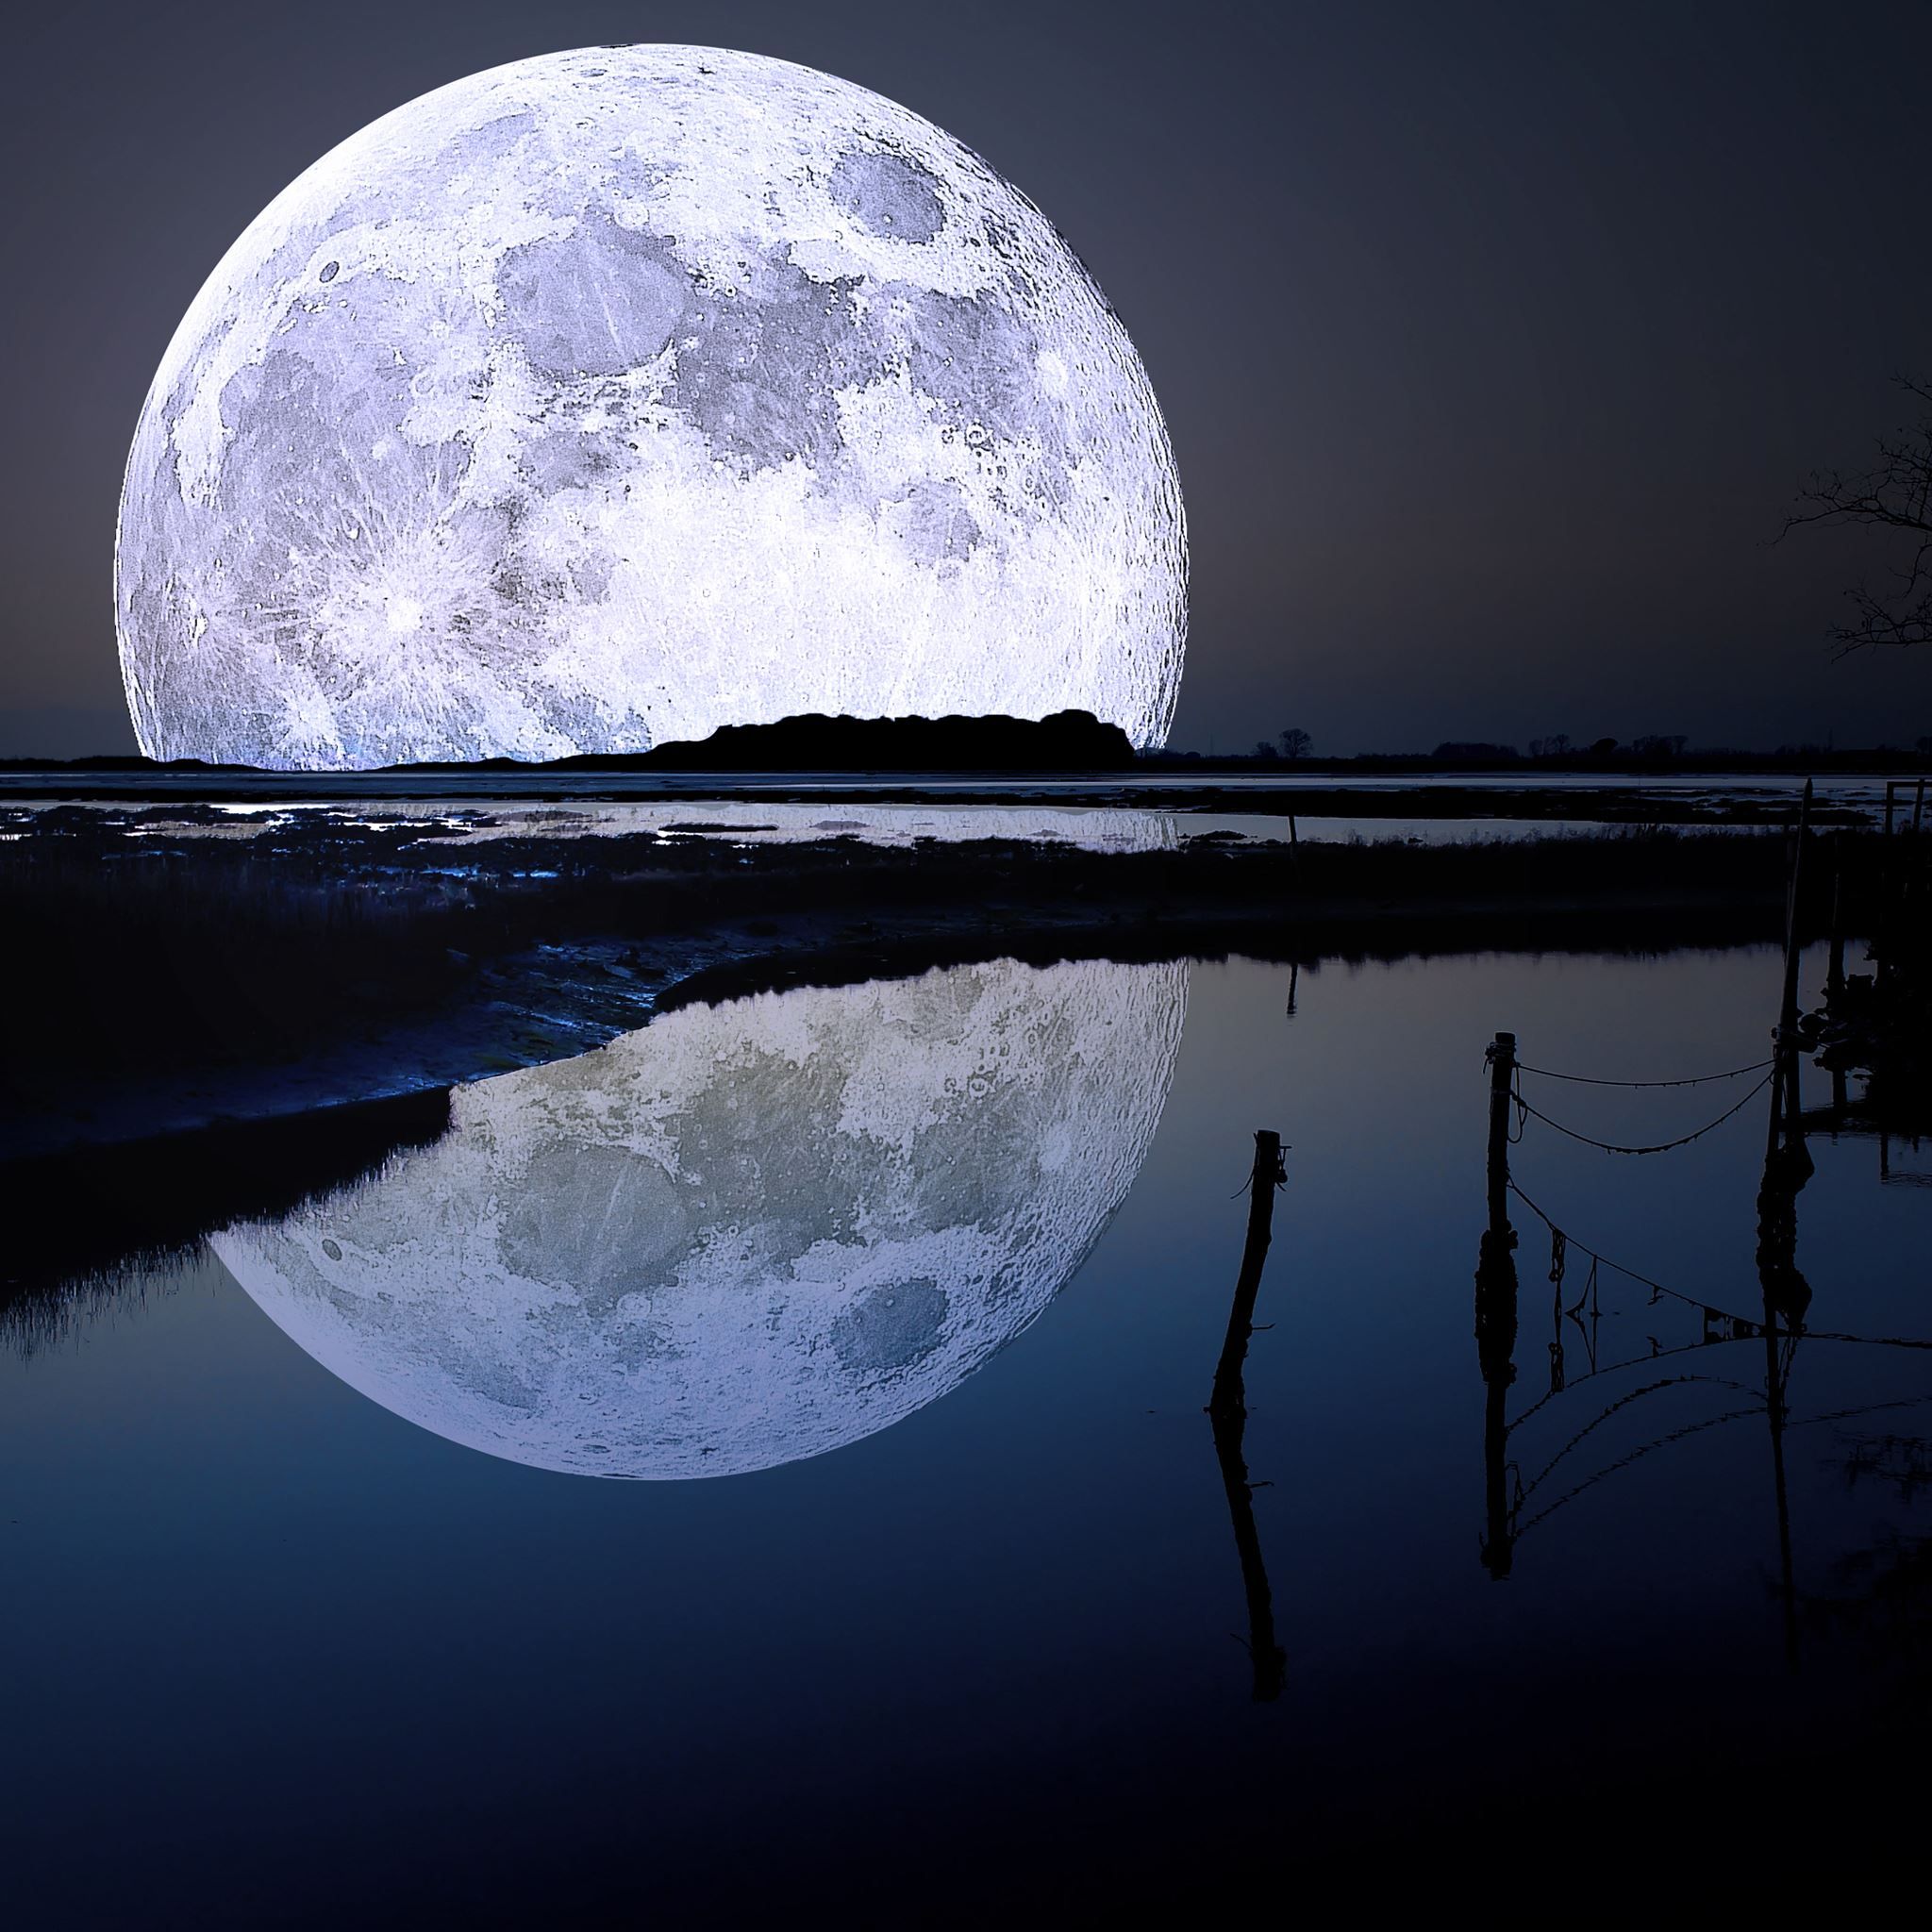 A full moon reflects in the water - Moon